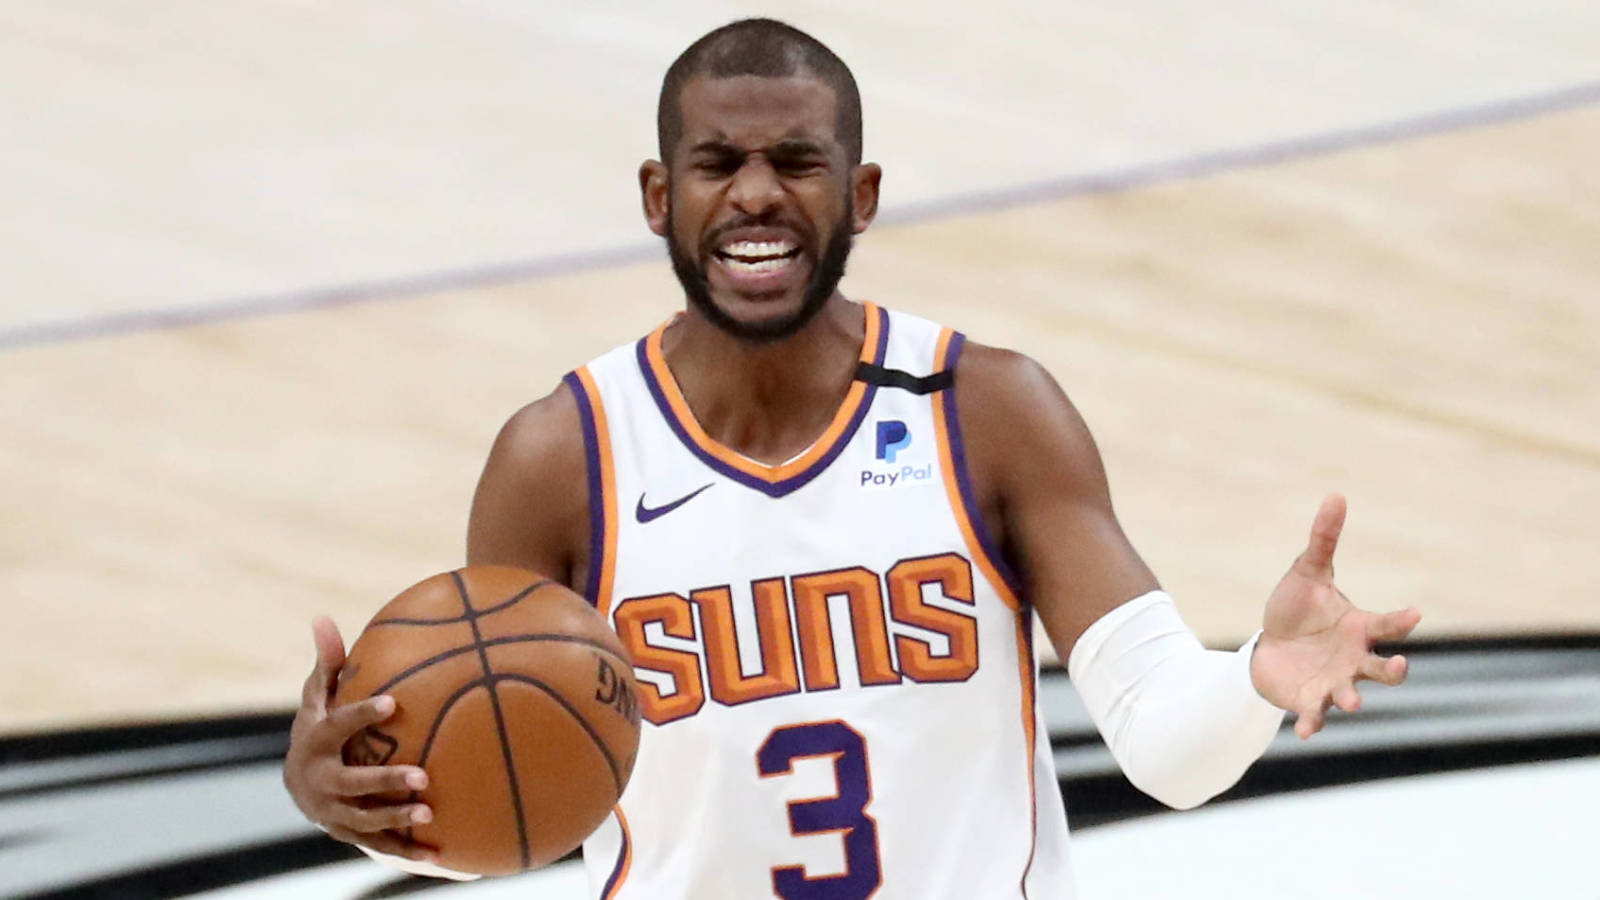 Feb 1, 2021; Dallas, Texas, USA; Phoenix Suns guard Chris Paul (3) reacts during the first half against the Dallas Mavericks at American Airlines Center. Mandatory Credit: Kevin Jairaj-USA TODAY Sports